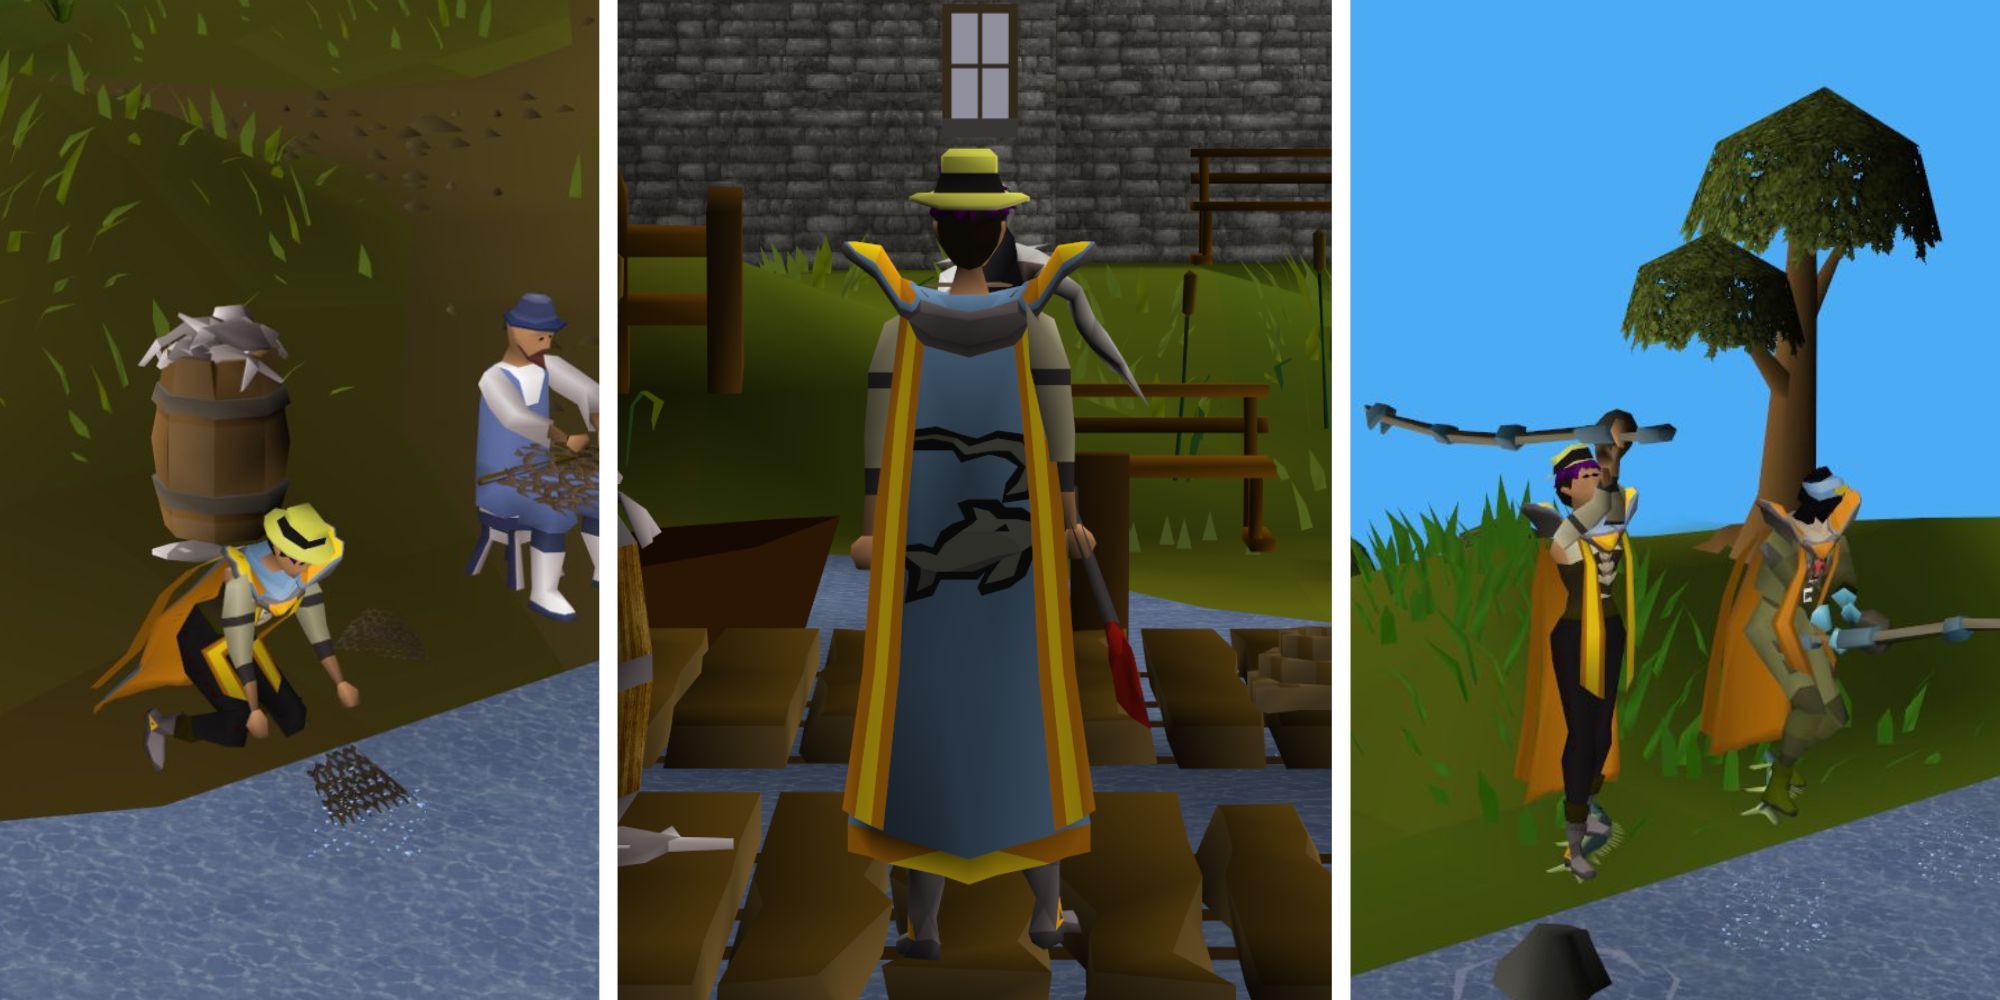 Osrs - A player fishing for shrimp, a player showing off the Fishing skillcape, and a player doing Barbarian fishing.